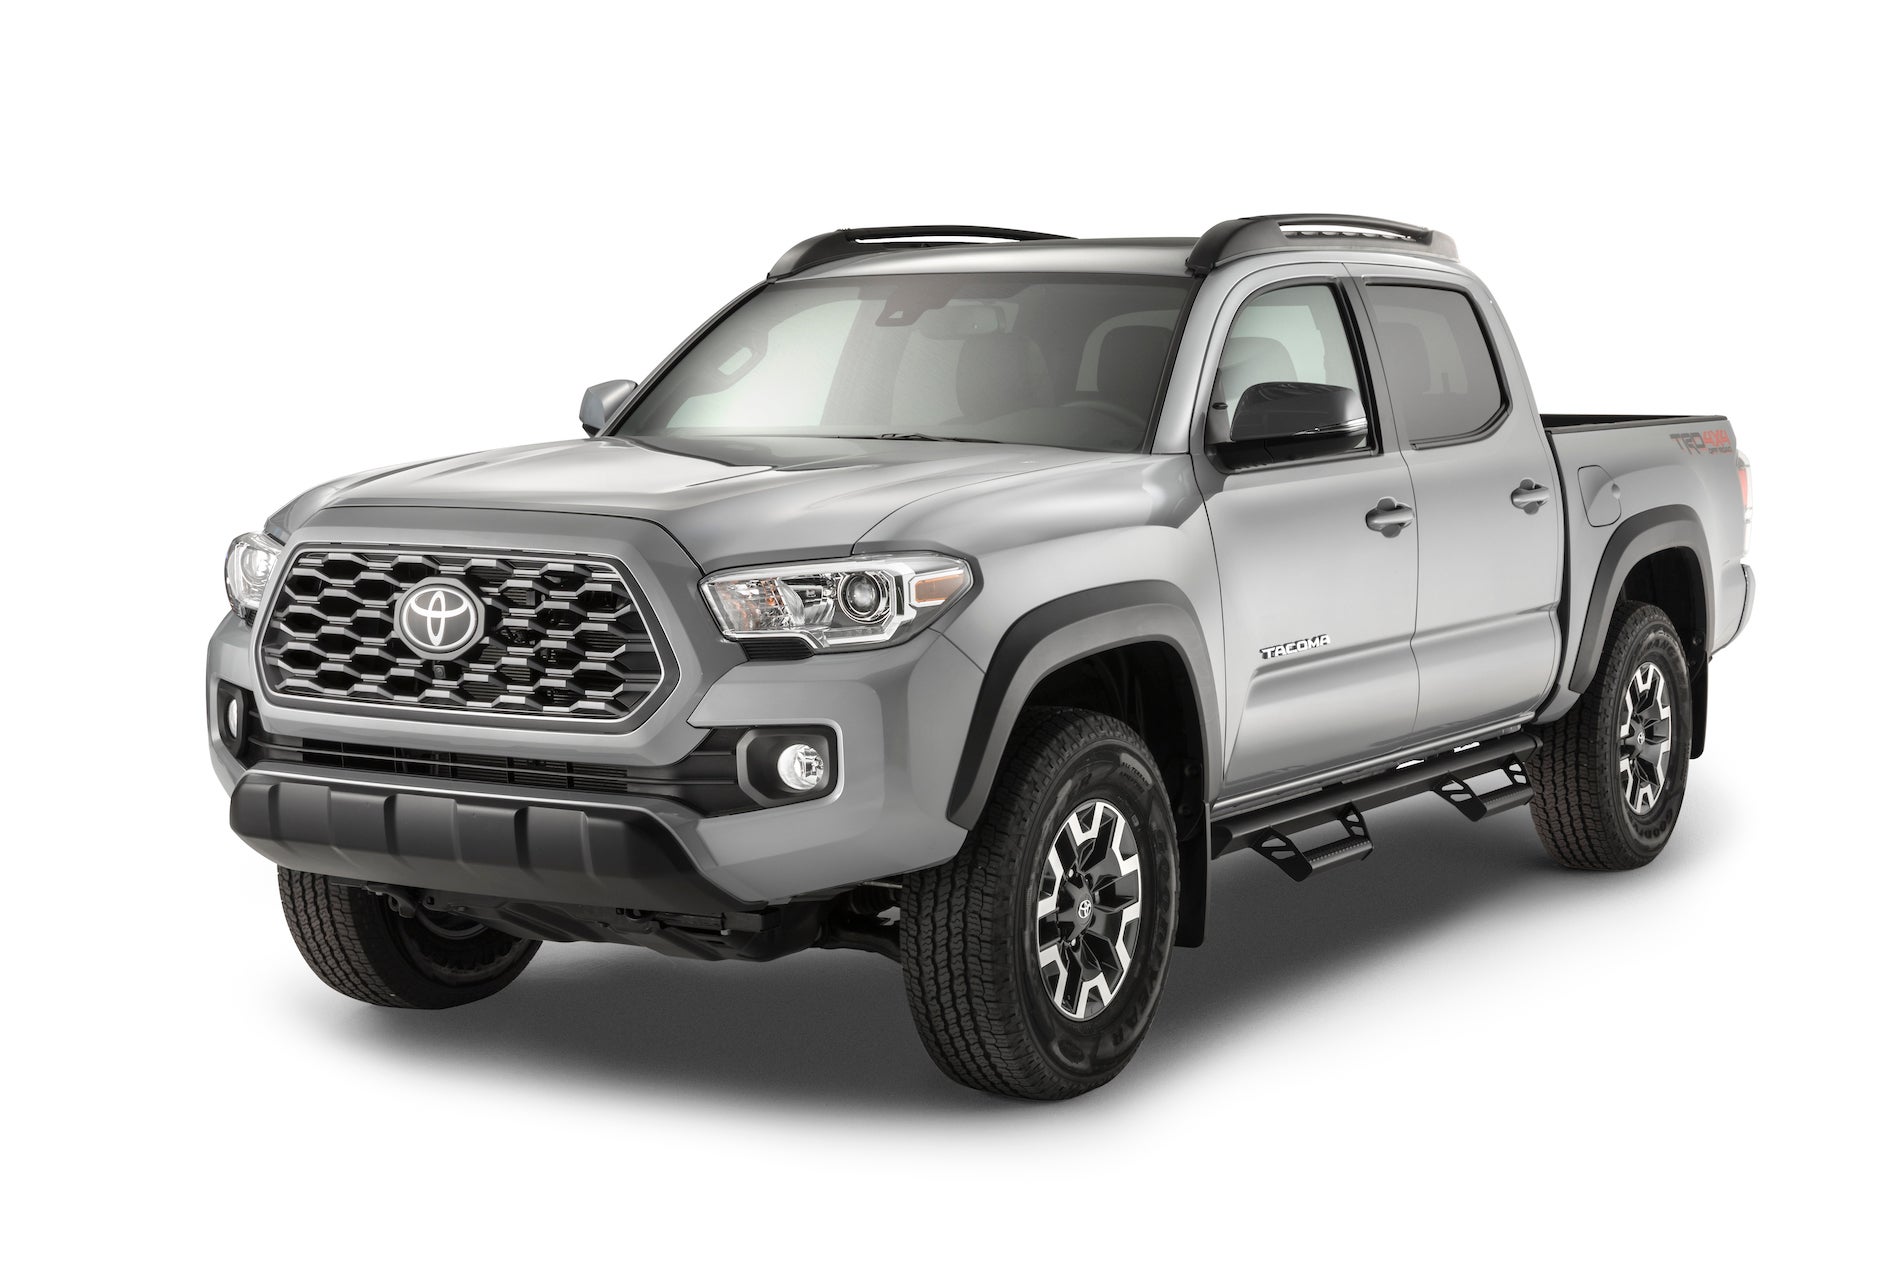 Toyota Tacoma Silver Front View